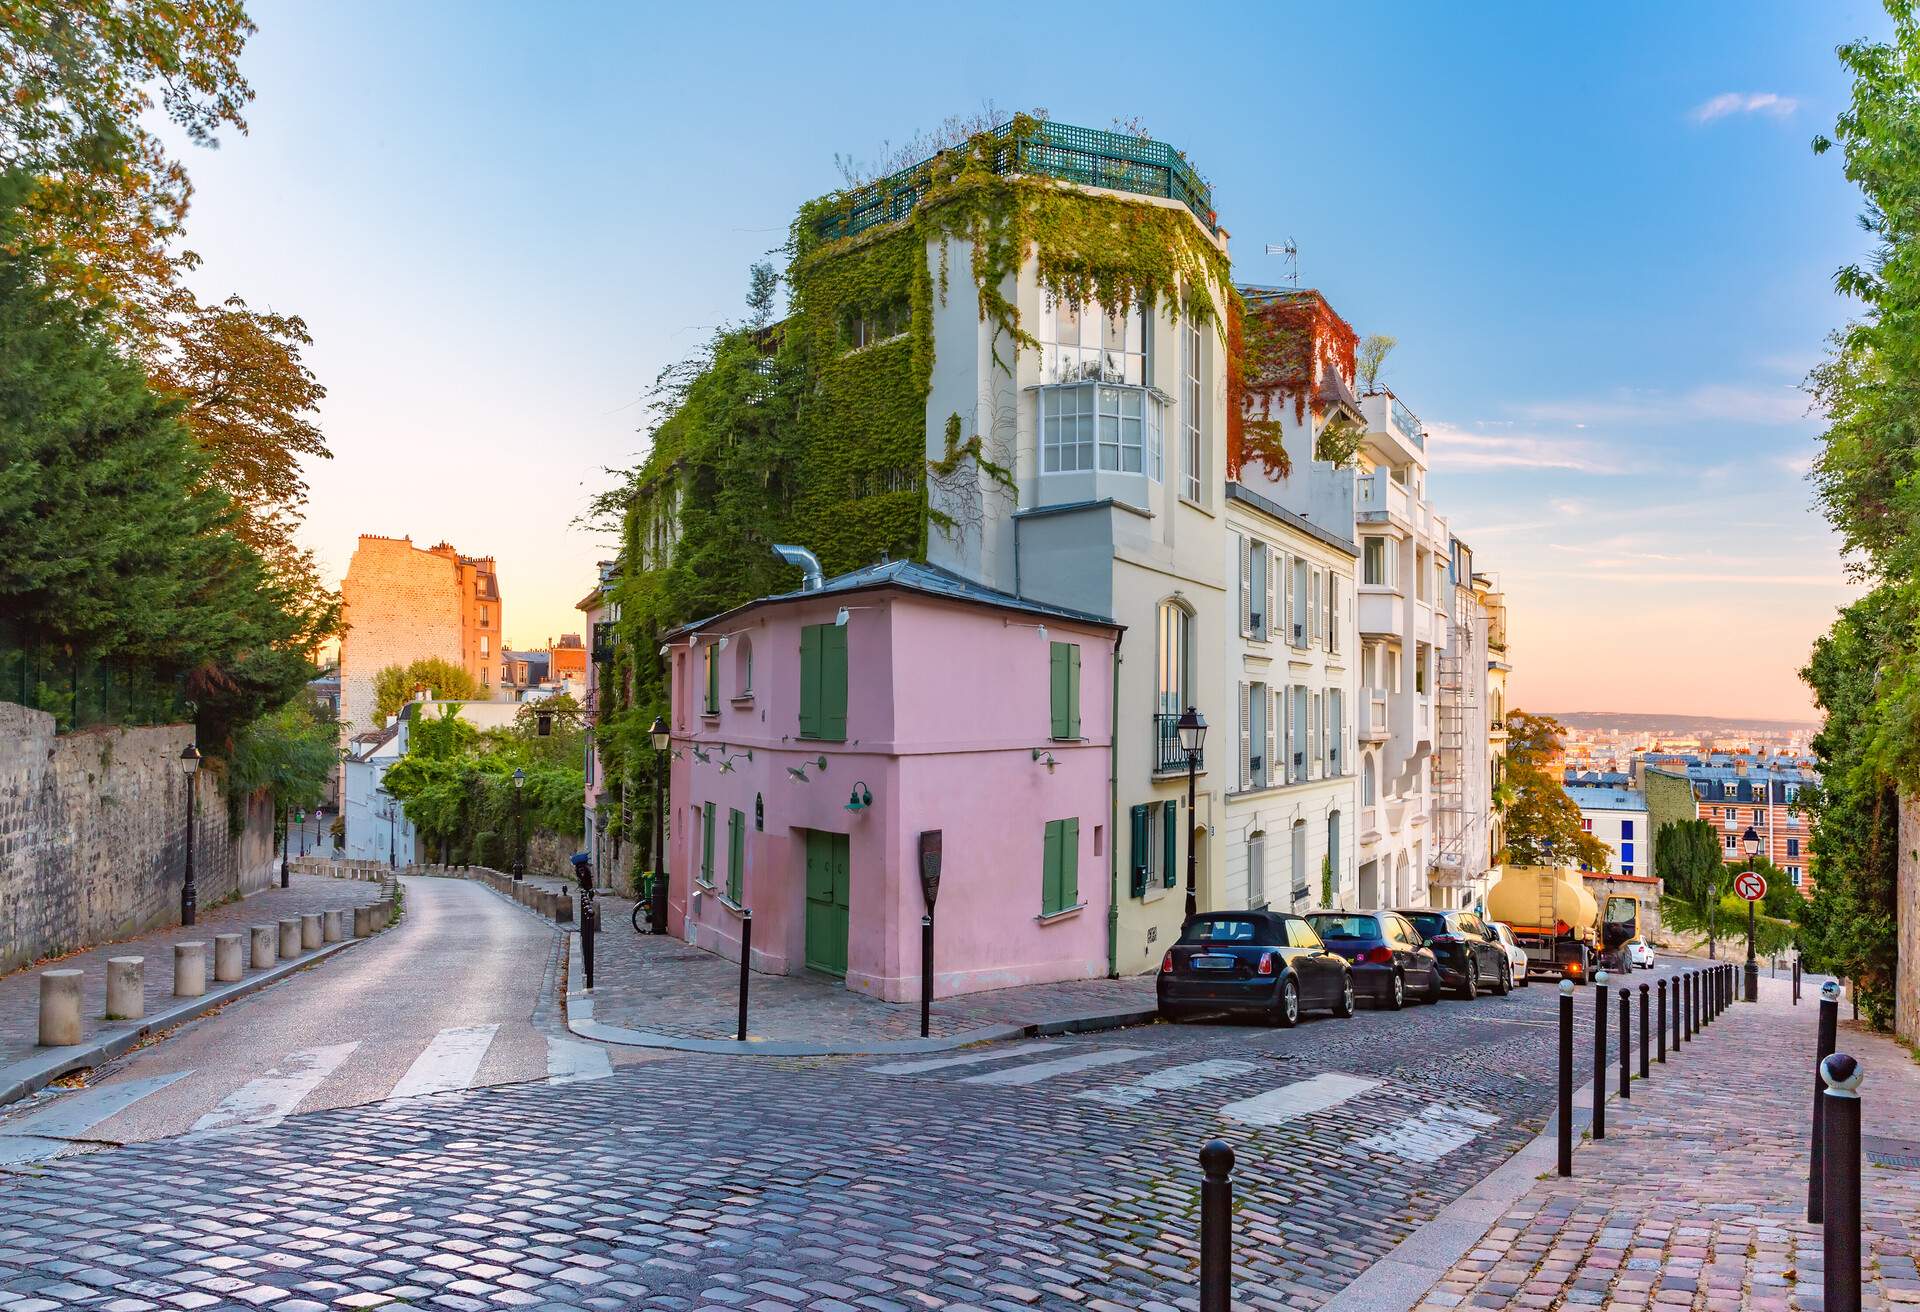 Old street with pink house at sunrise, Montmartre in Paris, France